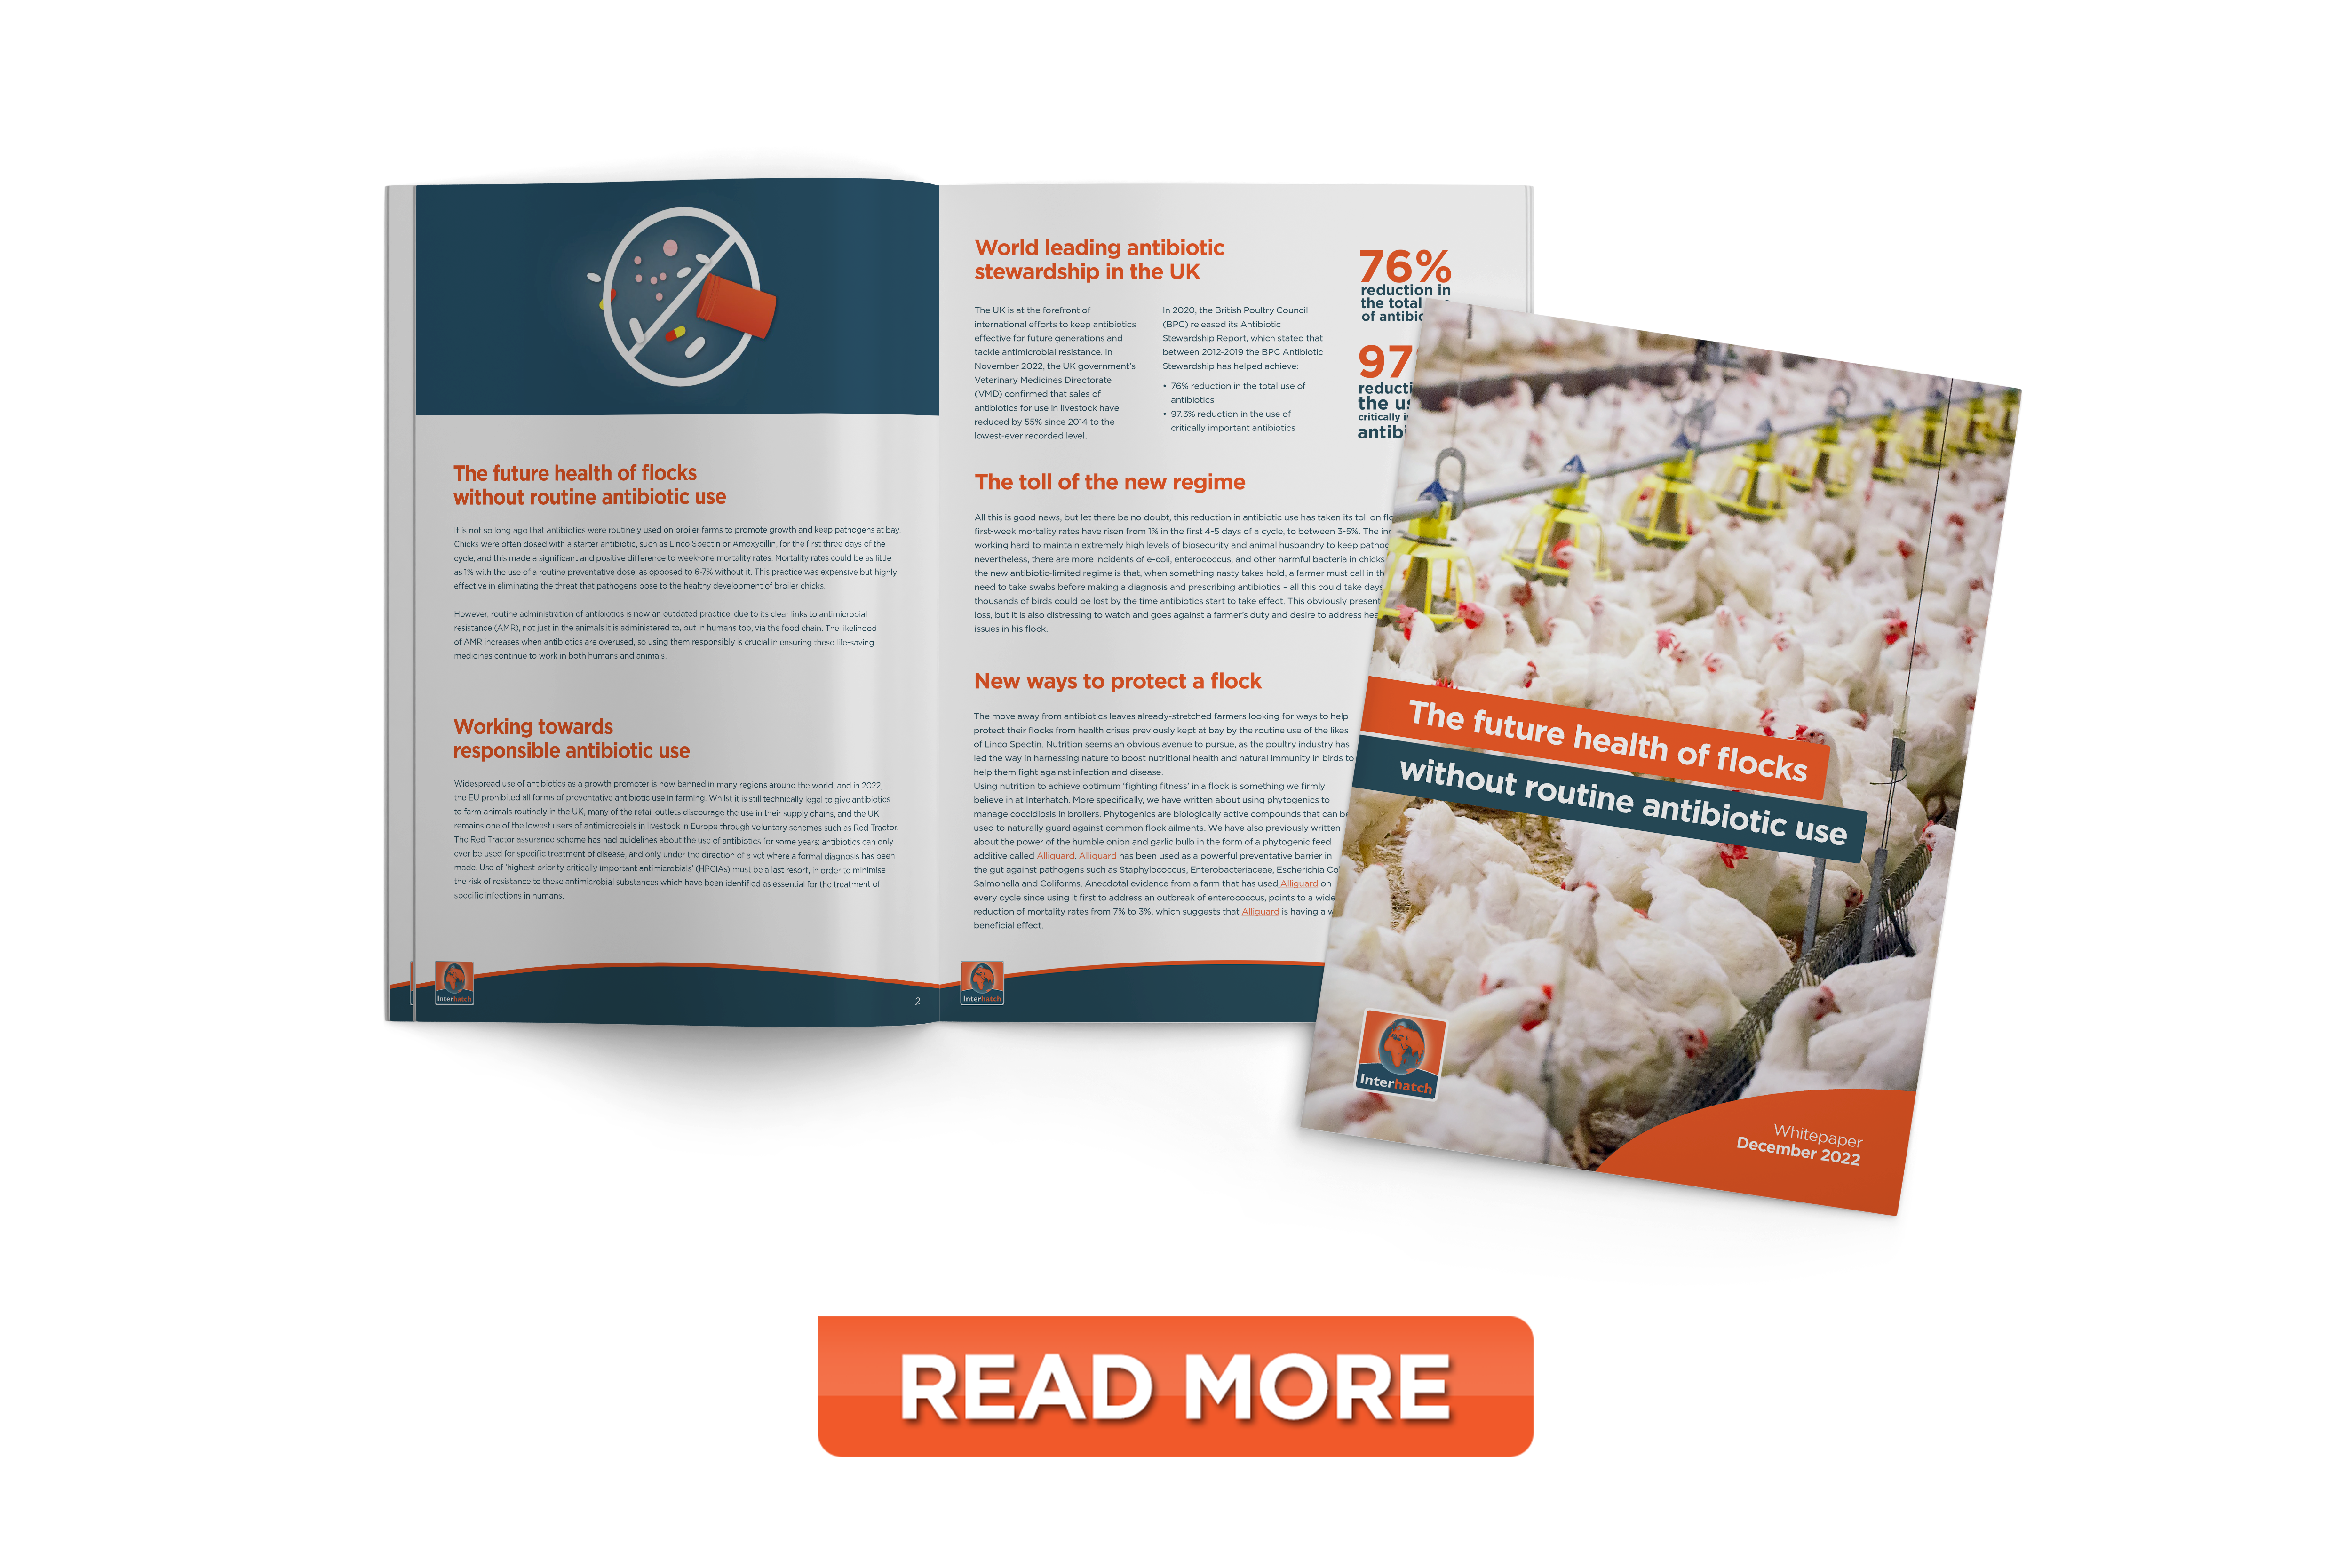 The future health of flocks without routine antibiotic use